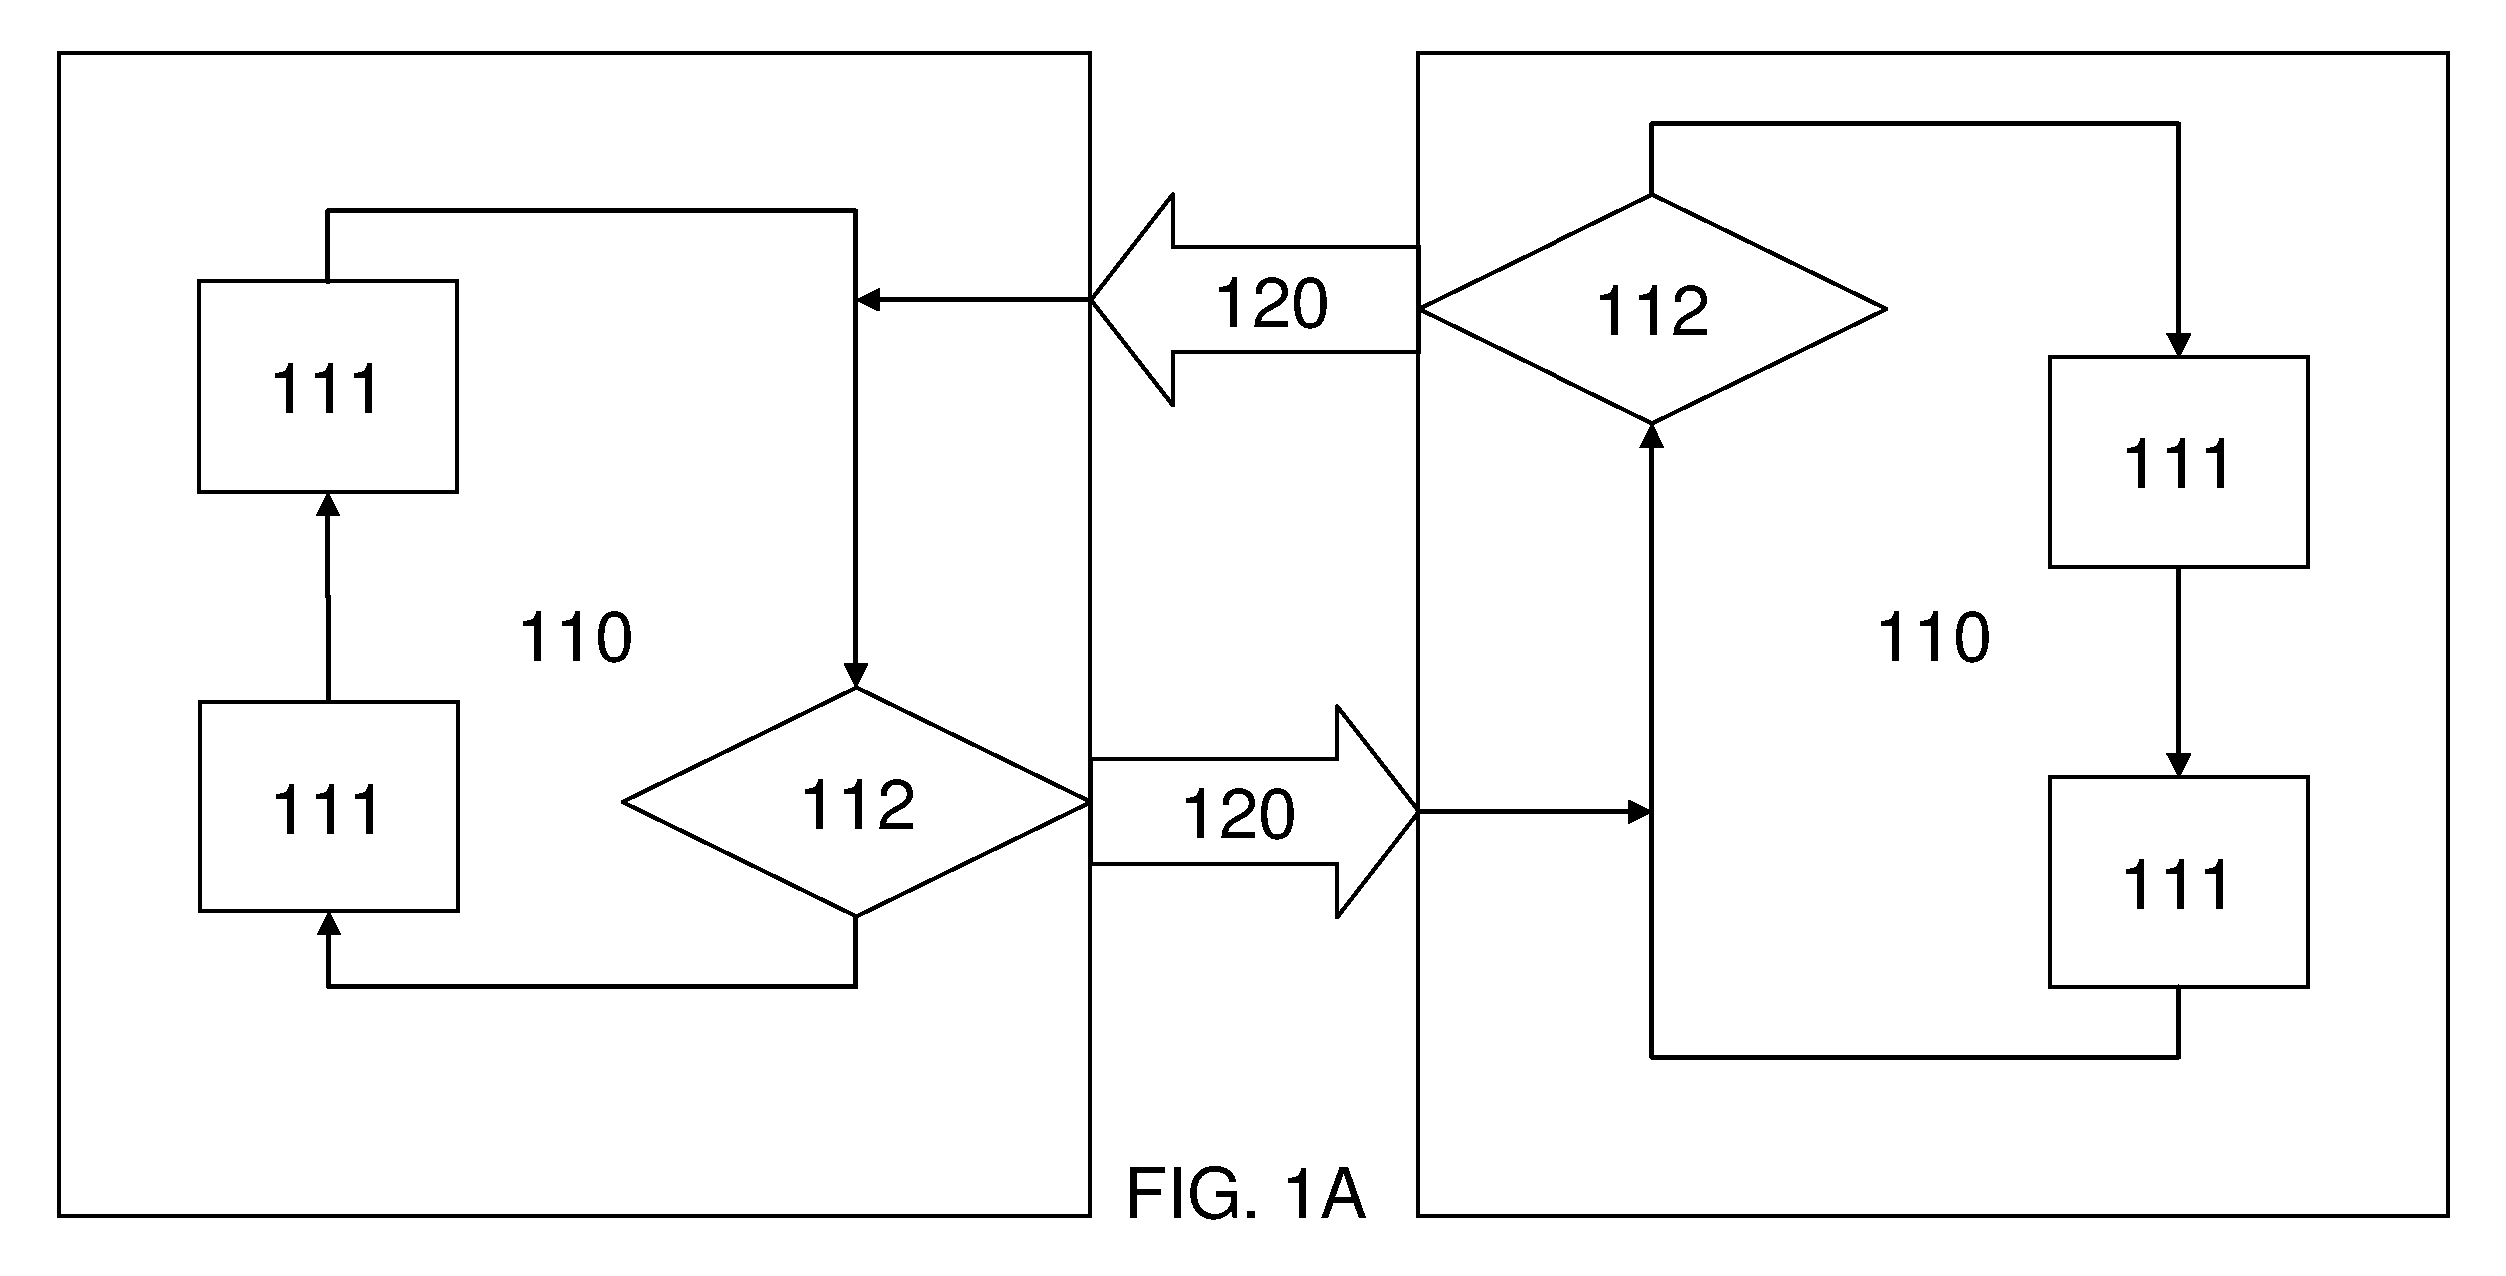 A reconfigurable system for verification of electronic circuits using high-speed serial links to connect asymmetrical evaluation and canvassing instruction processors